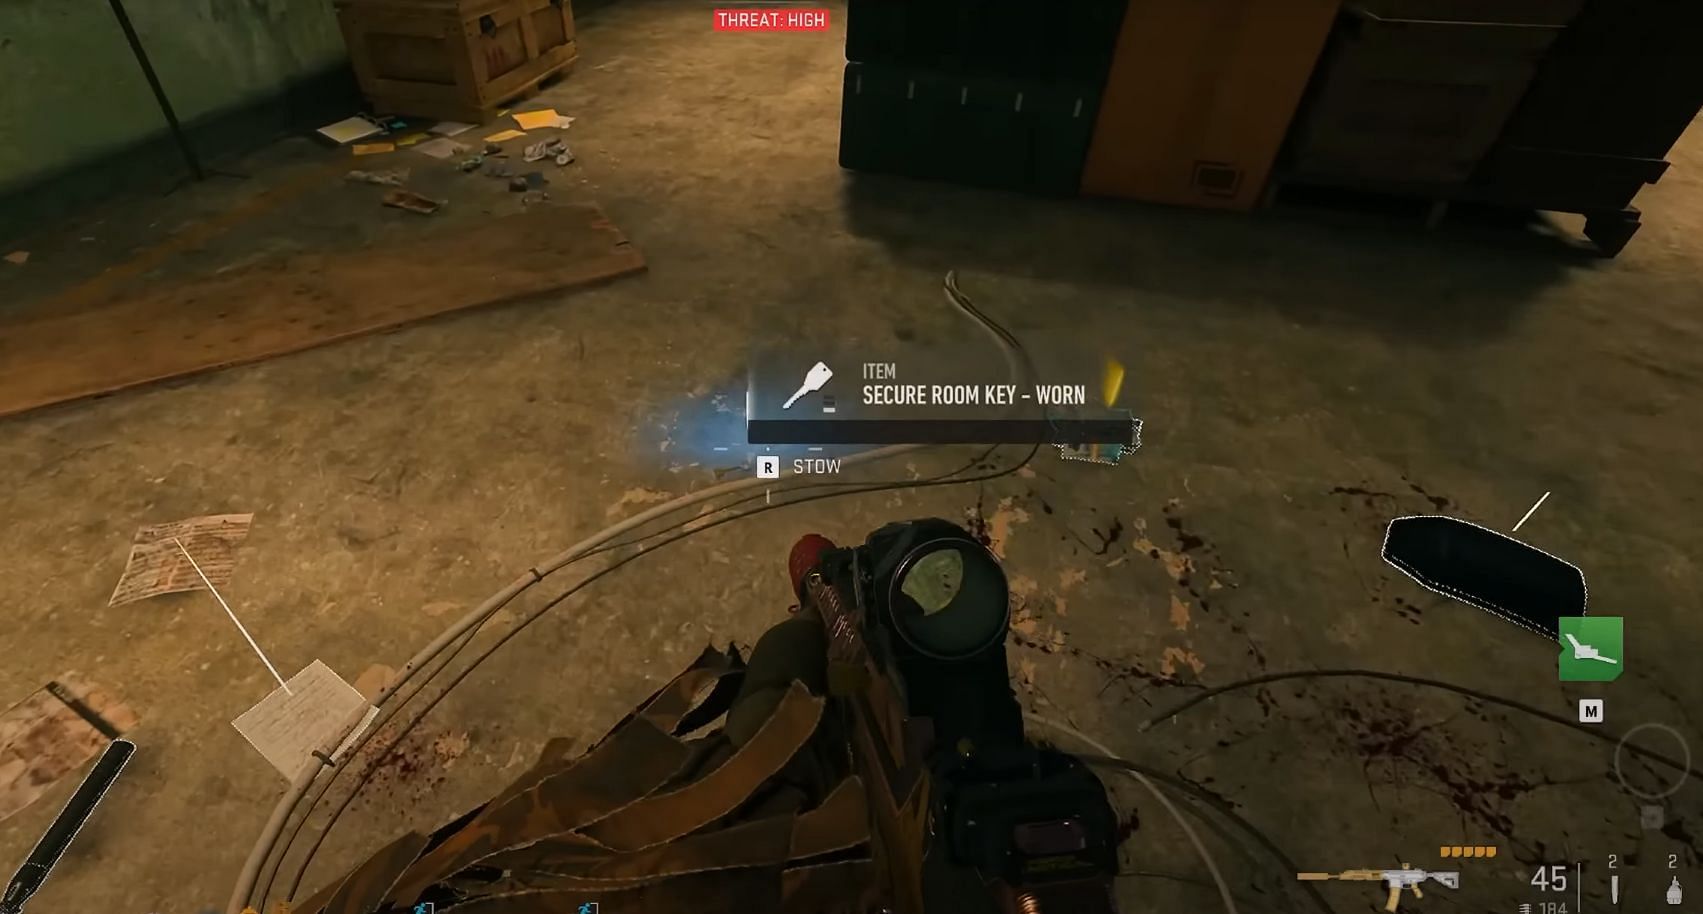 Secure Key dropped by the Sniper boss (Image via YouTube/ Phixate)